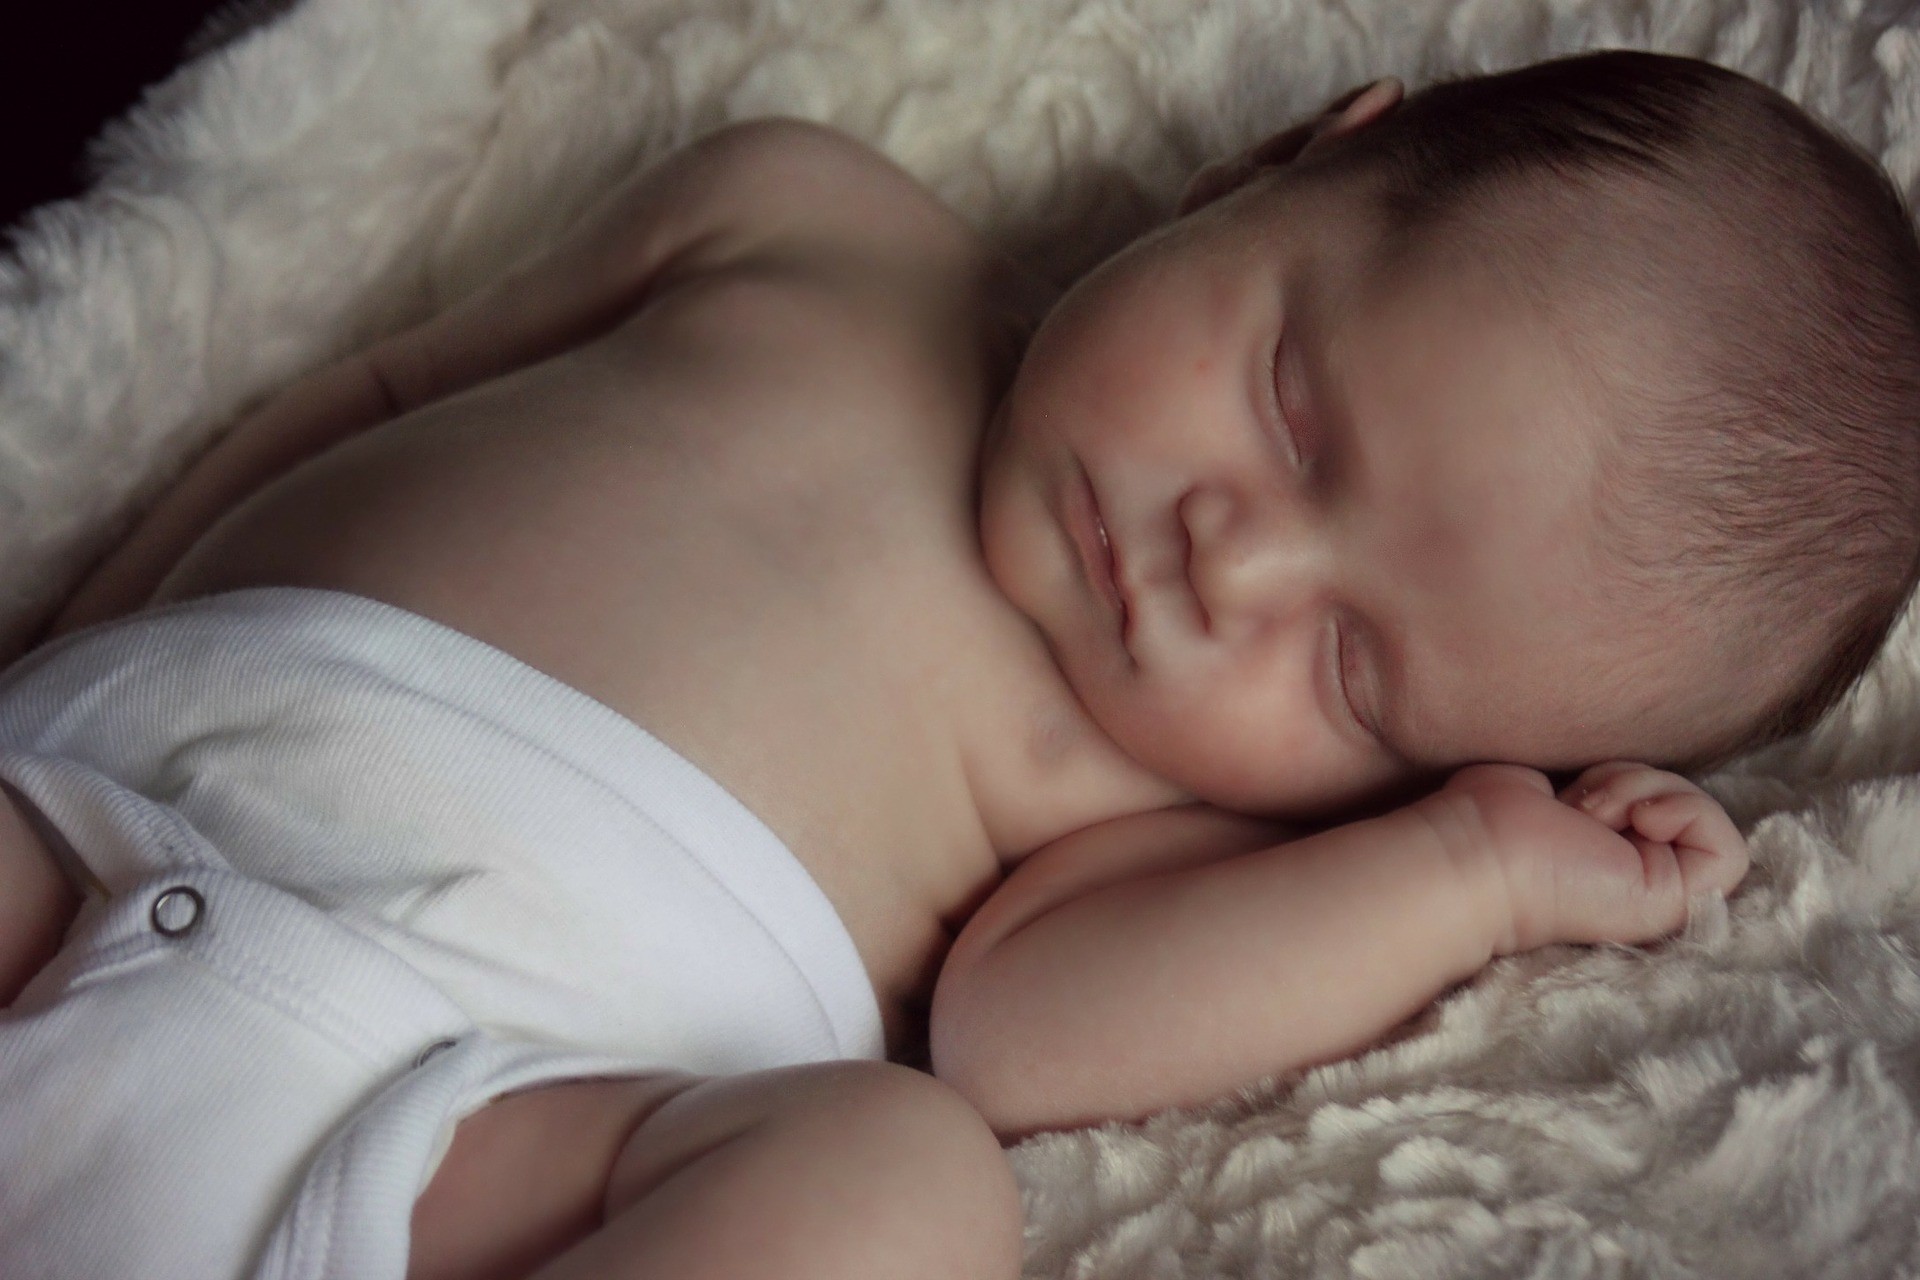 How to Take Care of Baby’s Umbilical Cord that is Important to Know